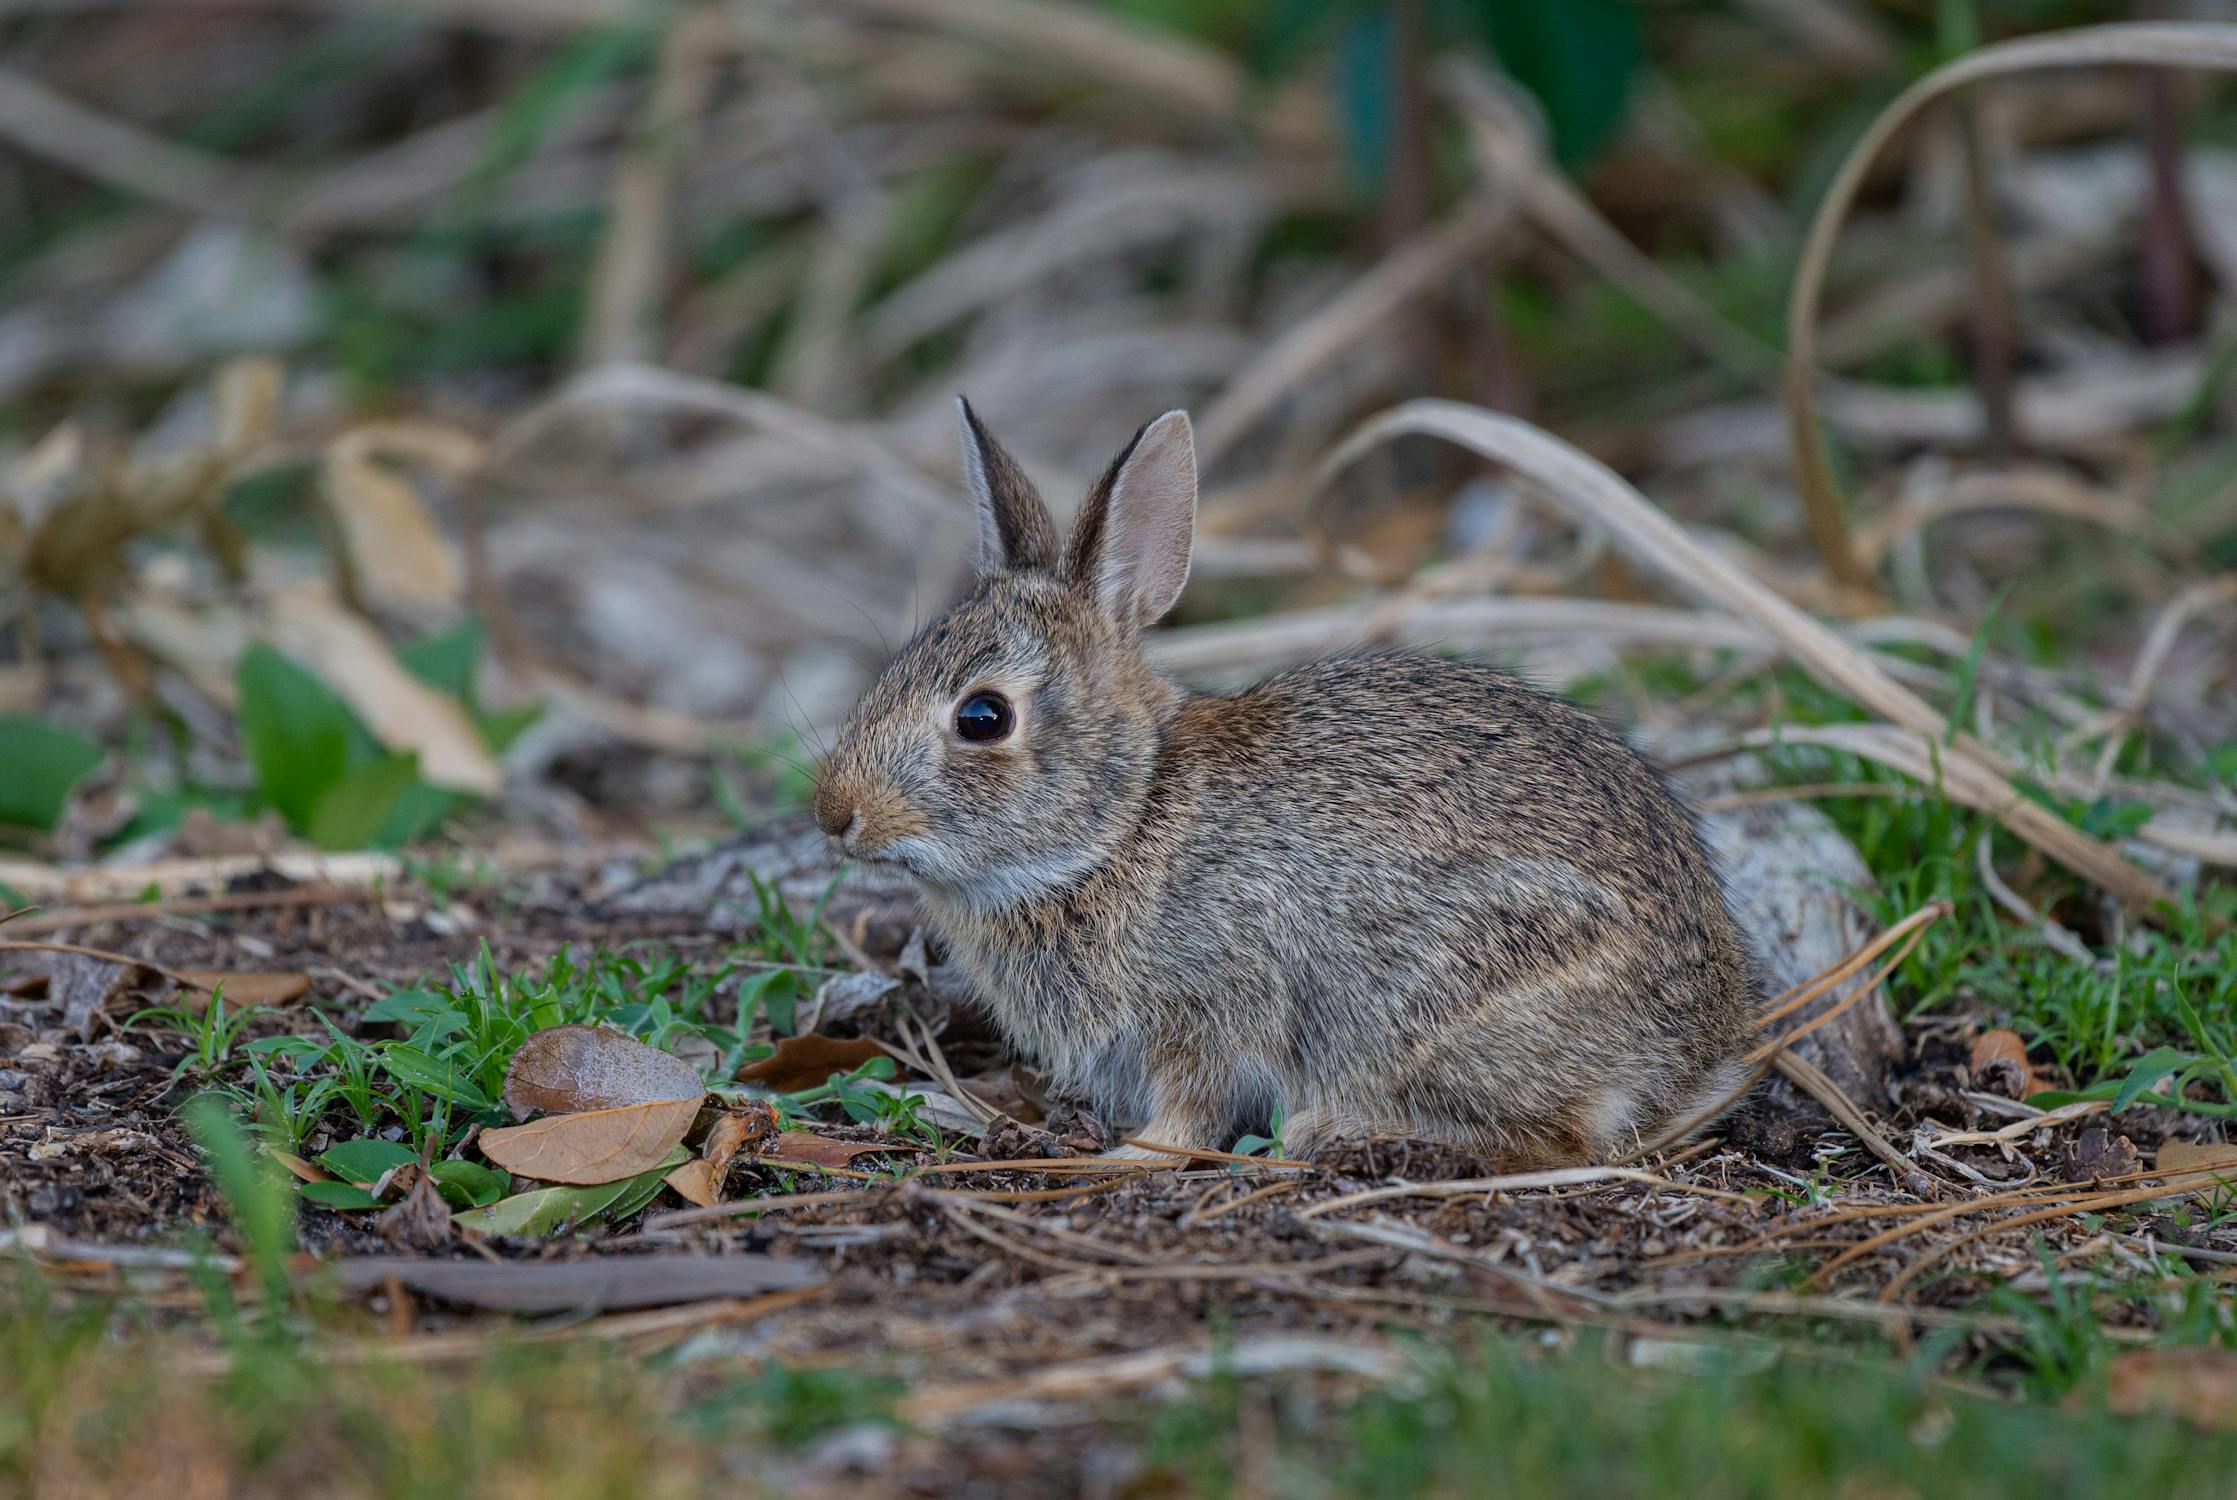 Rabbit Photo by Mike Russell from Pexels: https://www.pexels.com/photo/close-up-shot-of-a-rabbit-7493436/